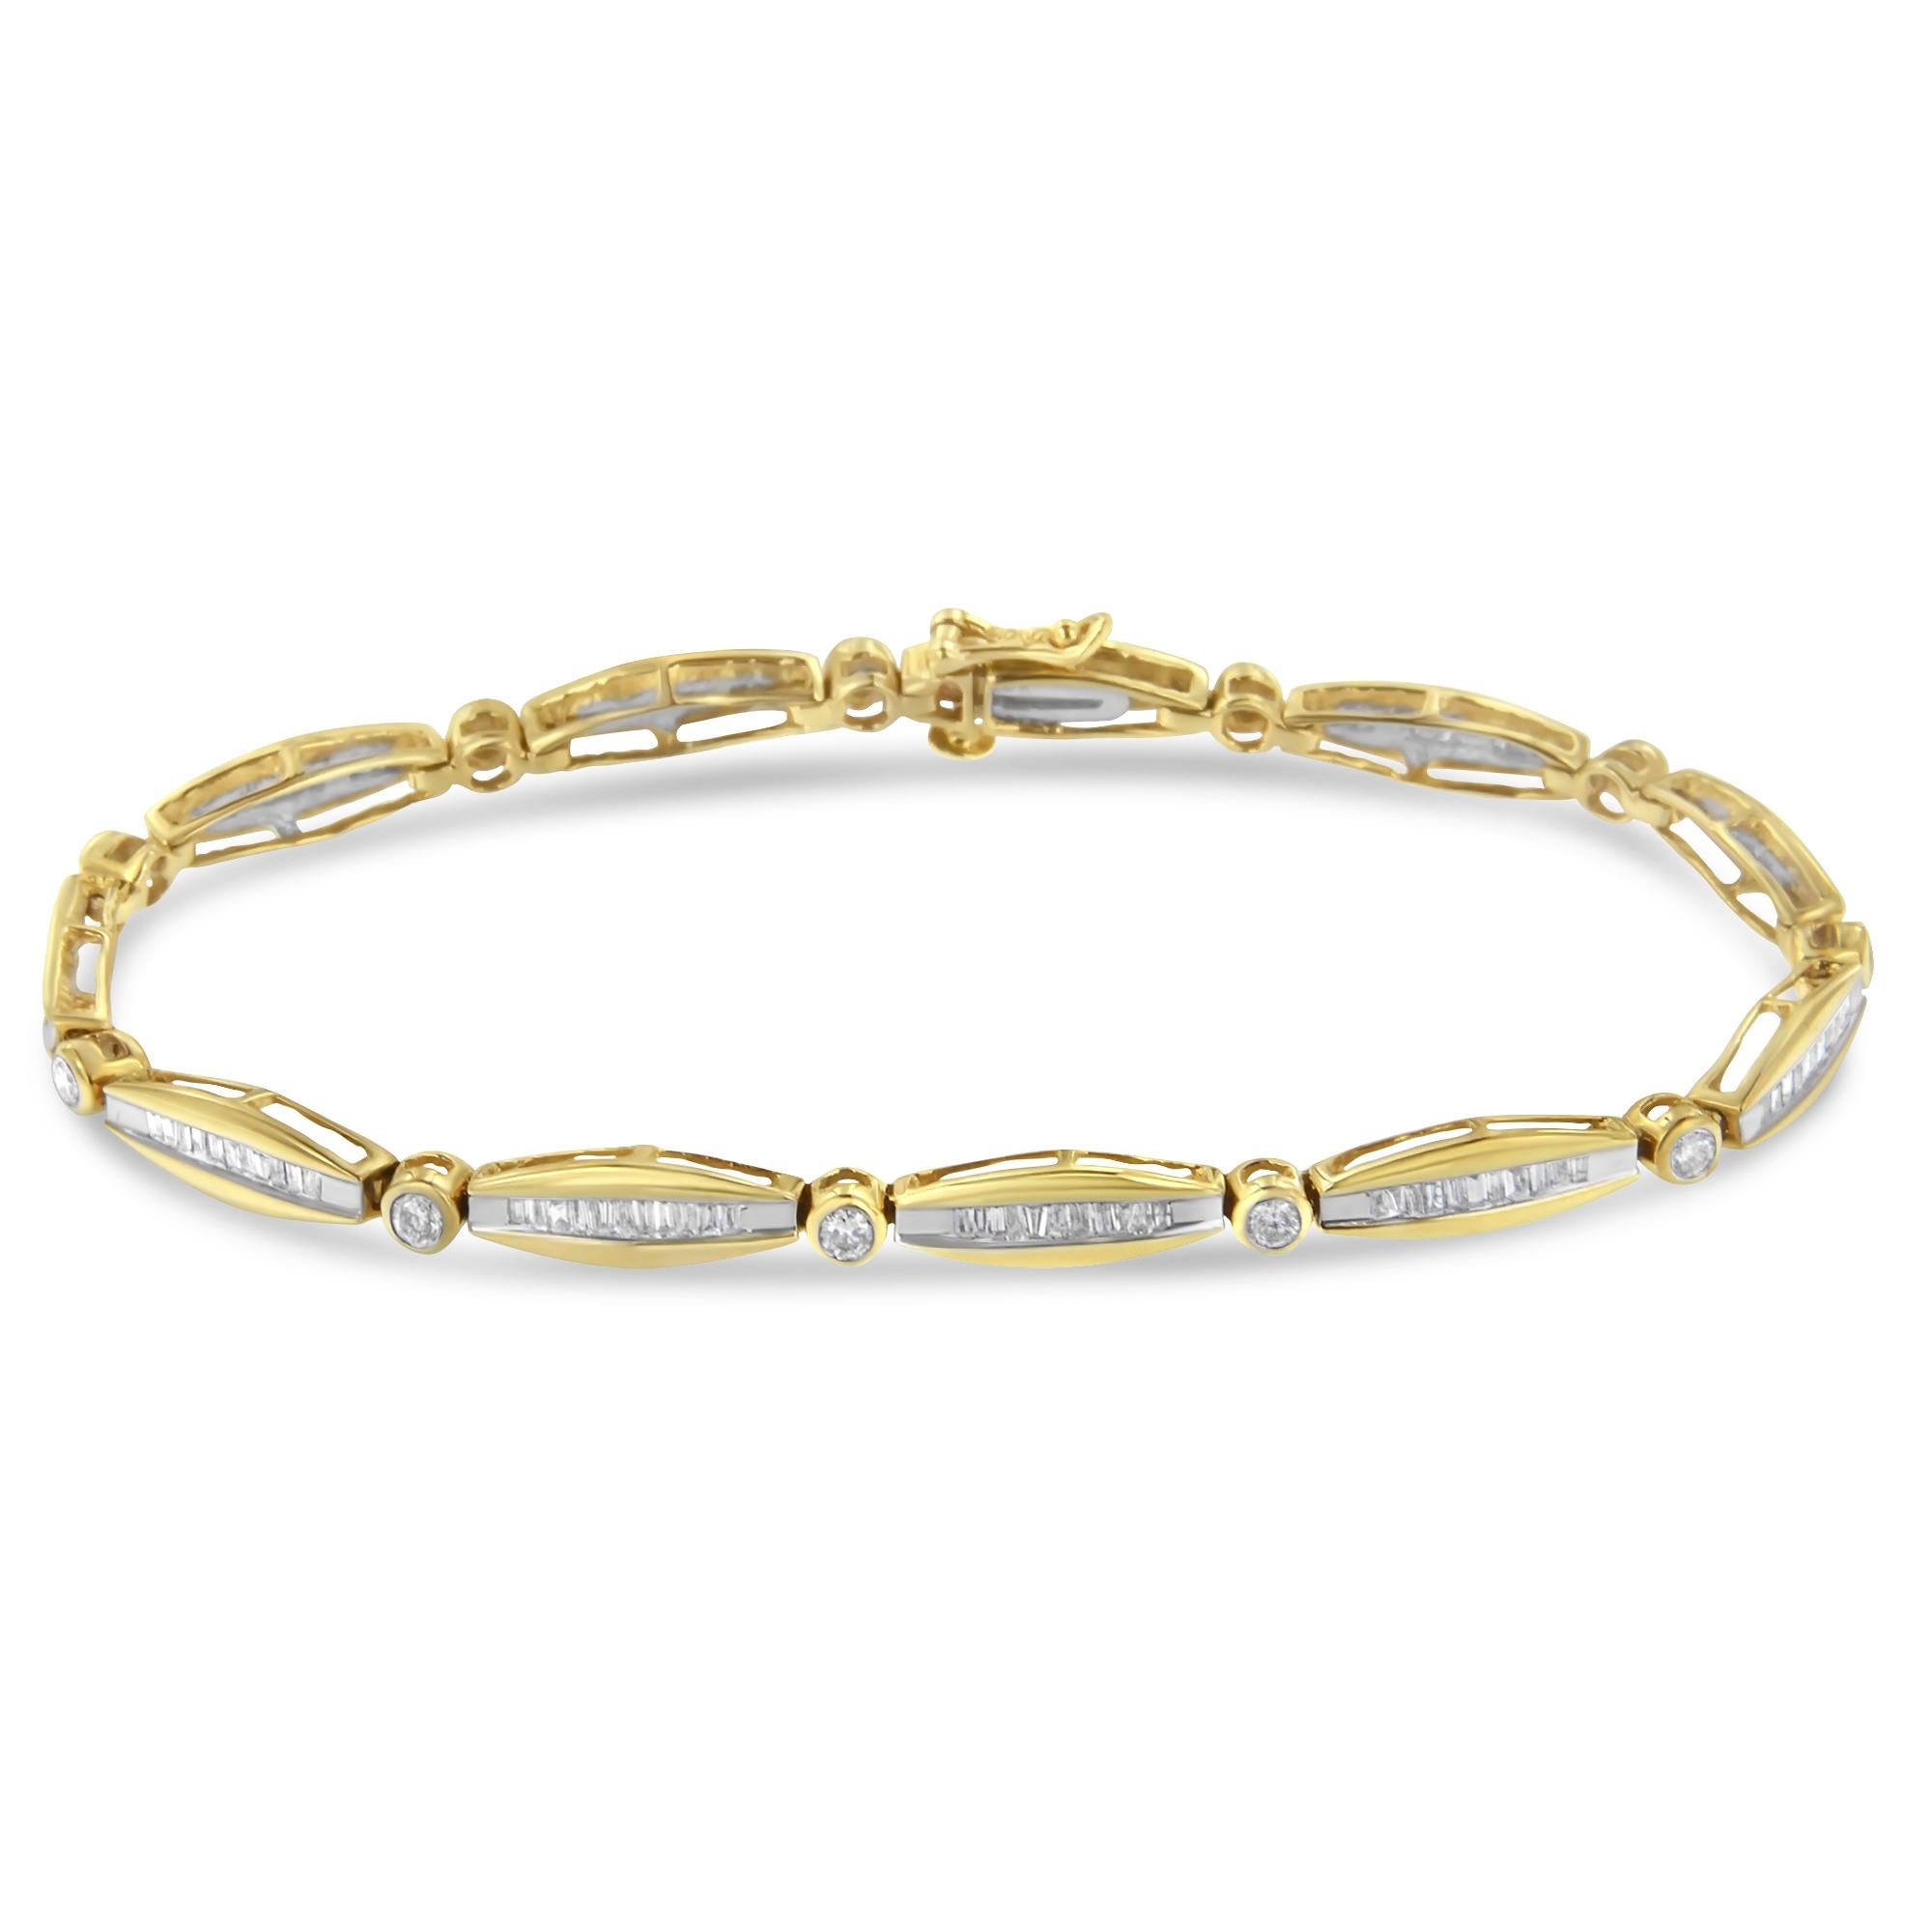 Elegant and timeless, this gorgeous 14K yellow gold tennis bracelet features 1.5 carat total weight of diamonds with a whopping 121 stones in all. The tennis bracelet features alternating round links with bezel set, brilliant cut diamonds and